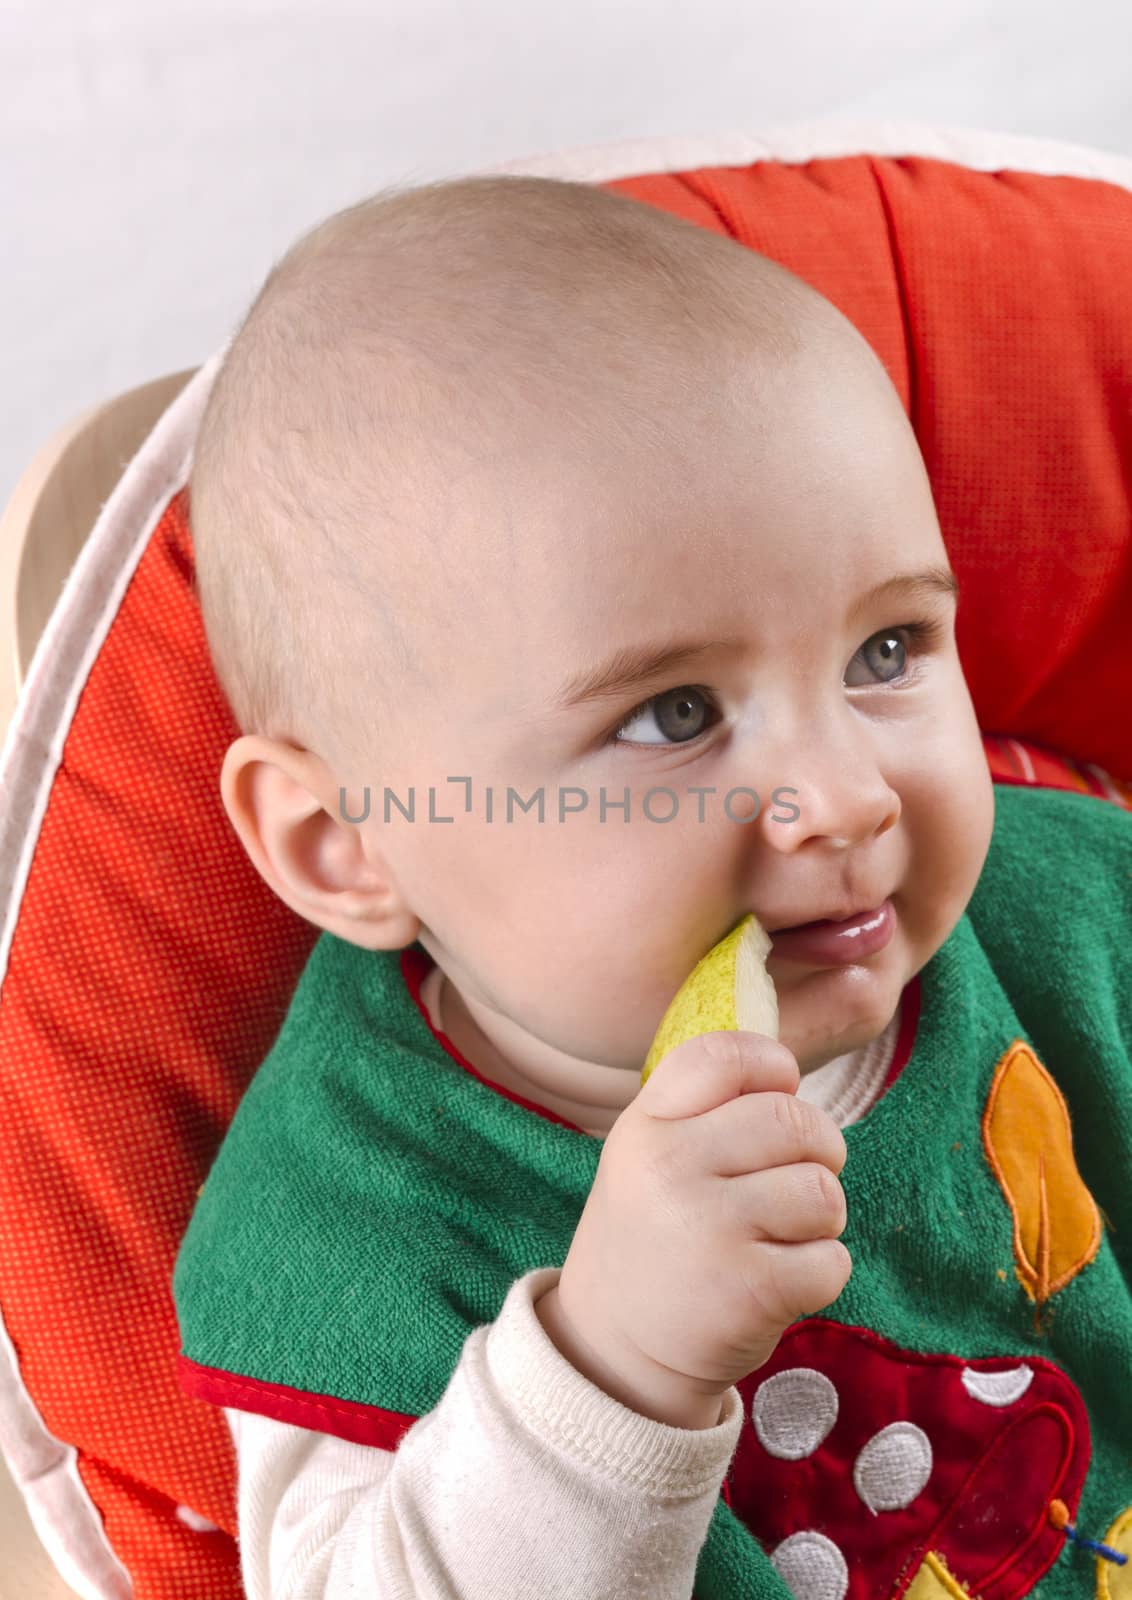 young baby sitting and eating an apple. Isolated on white.